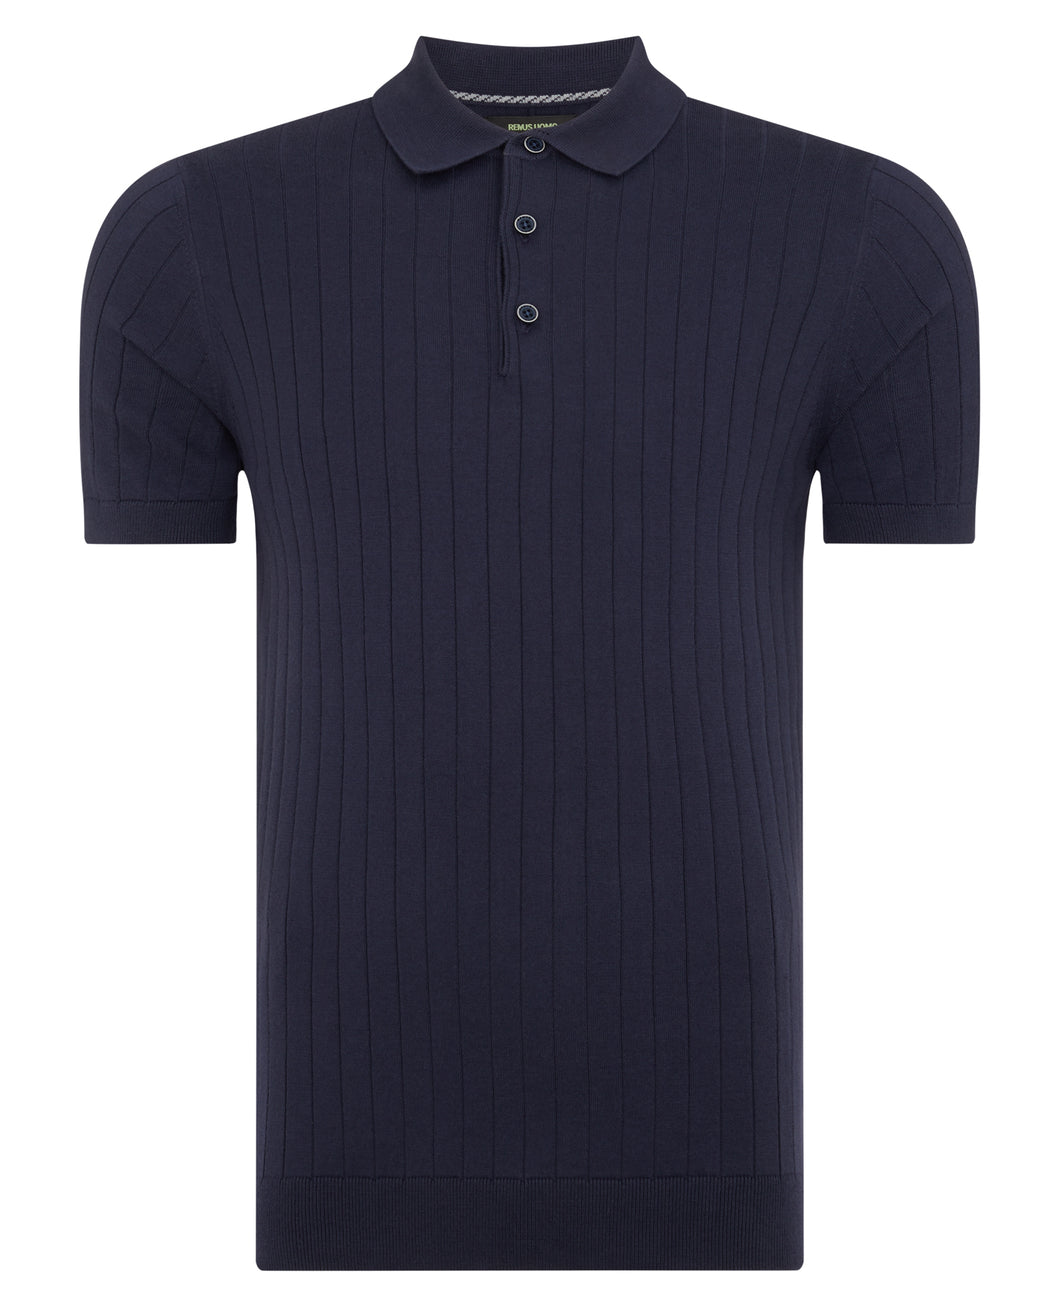 REMUS UOMO Short Sleeve Knitted Polo Shirt 3-58633